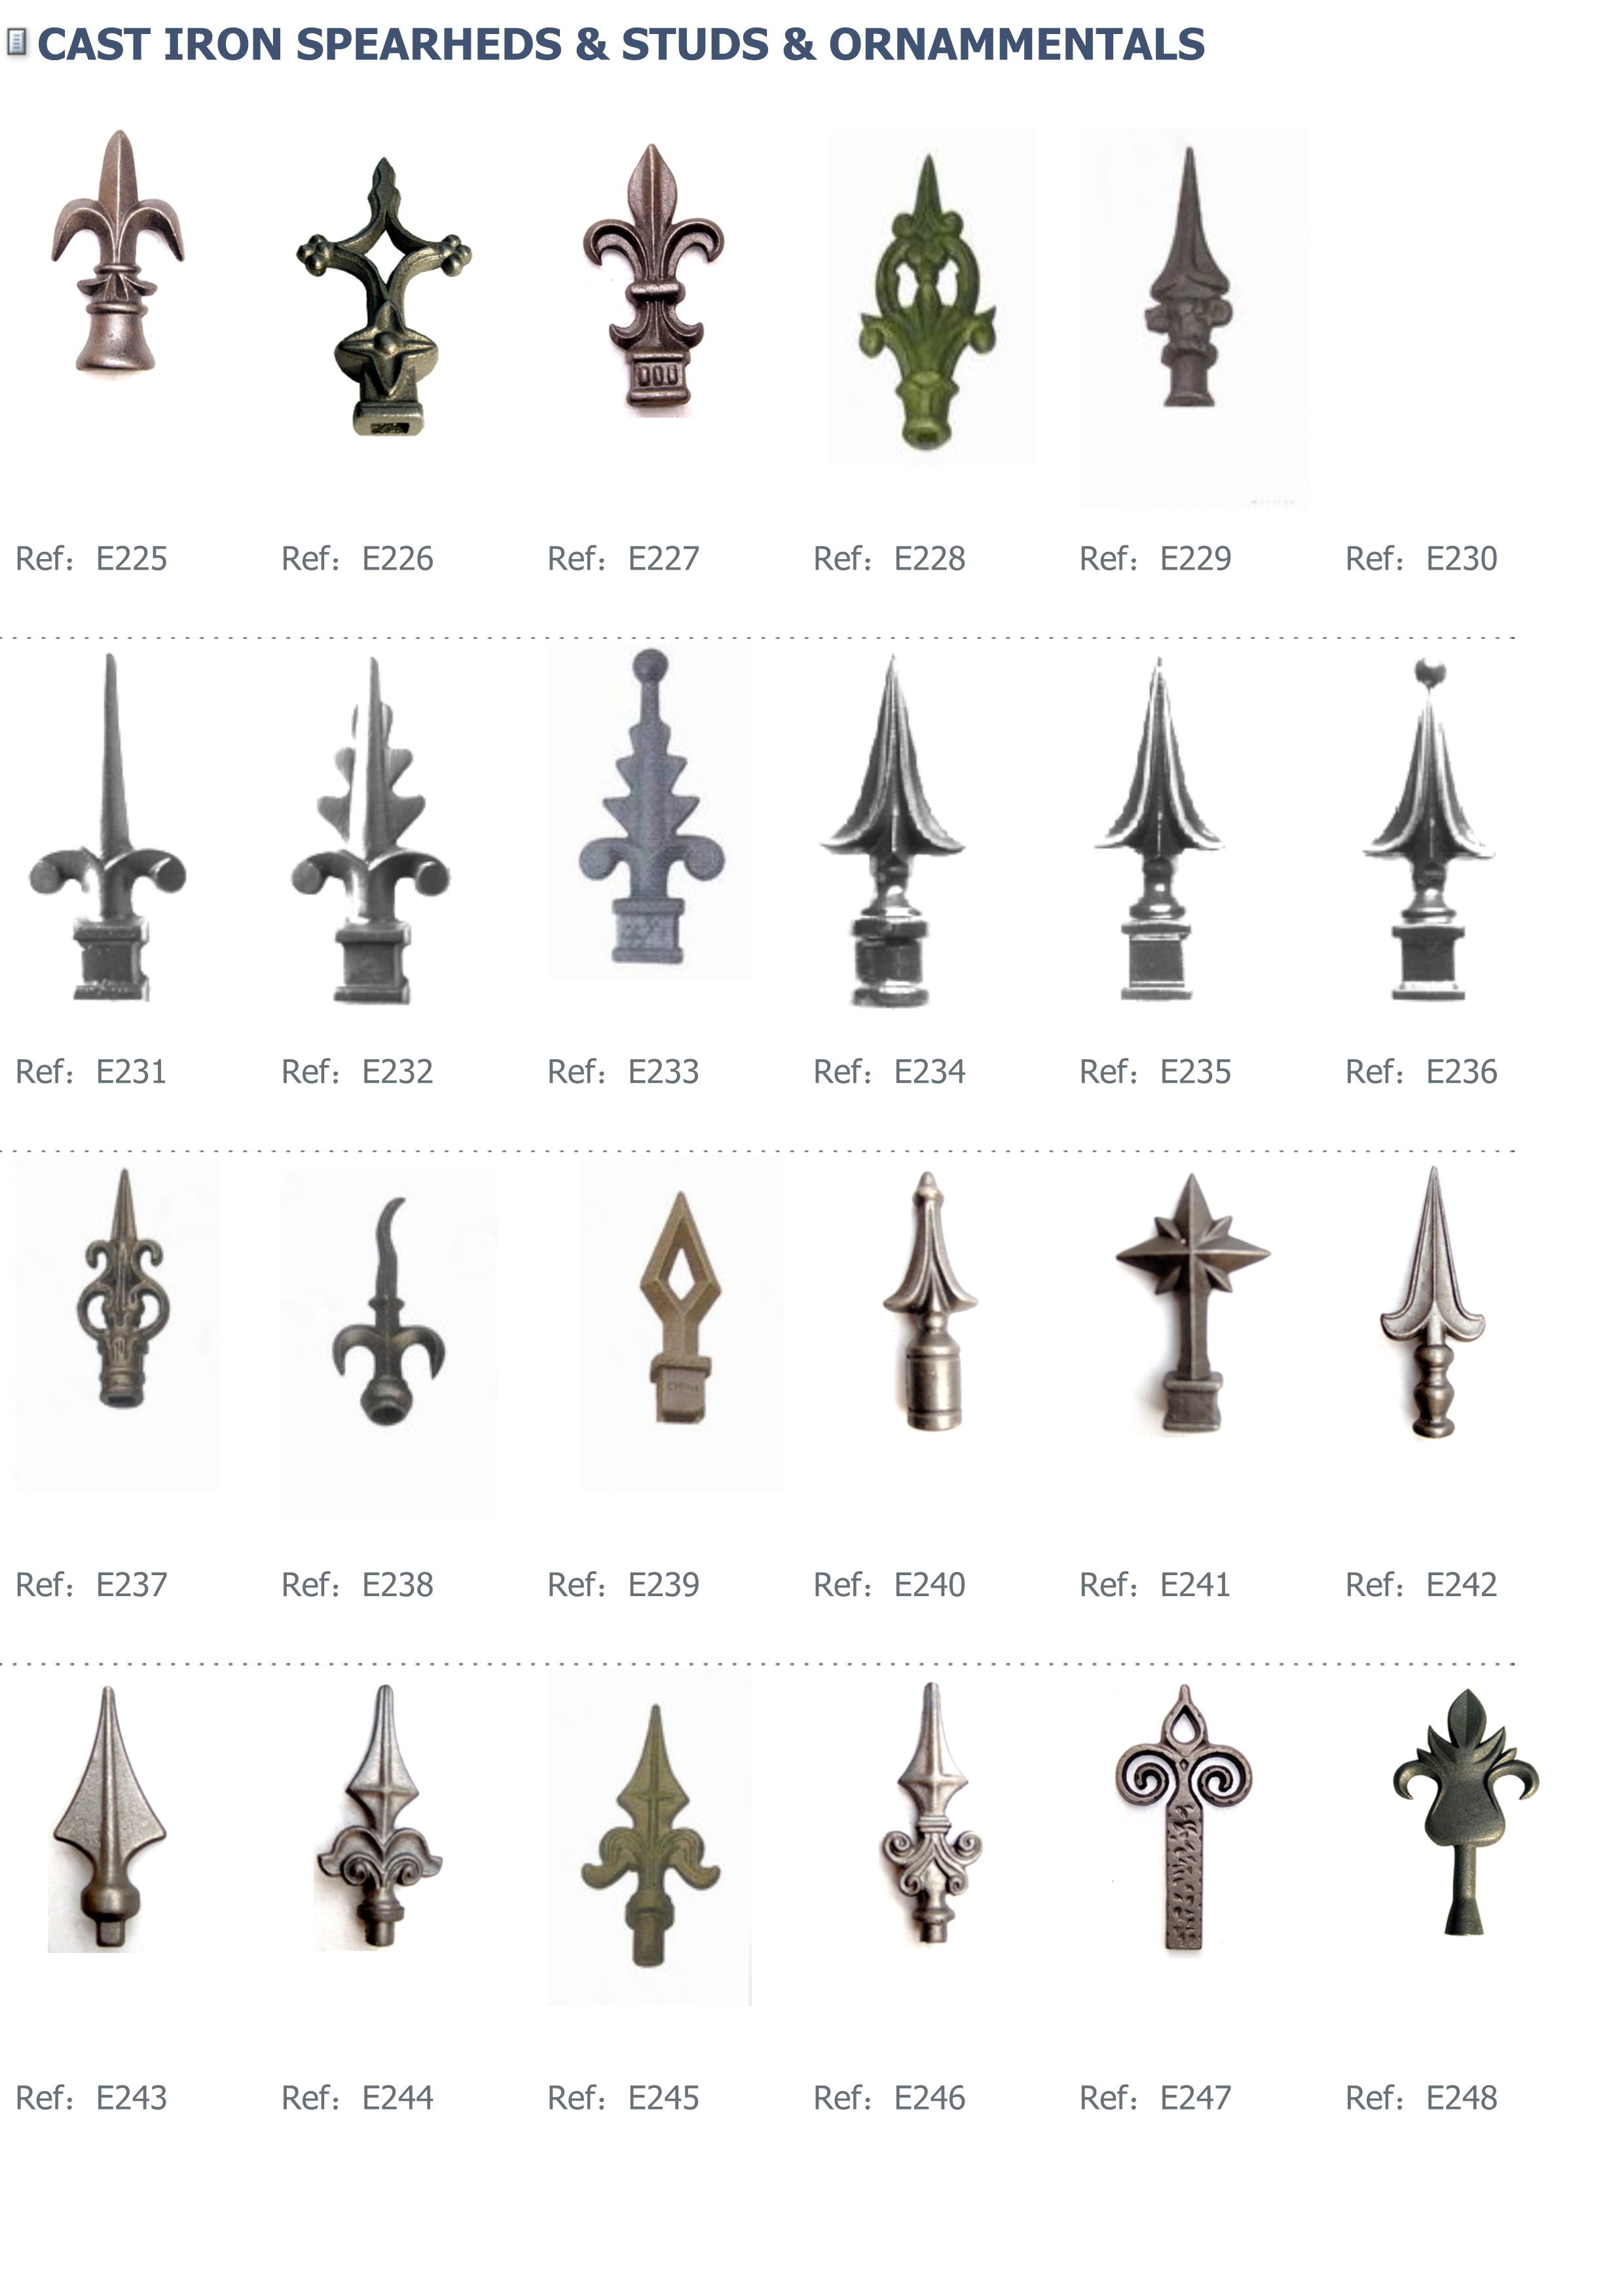 cast iron ornaments Featured Image